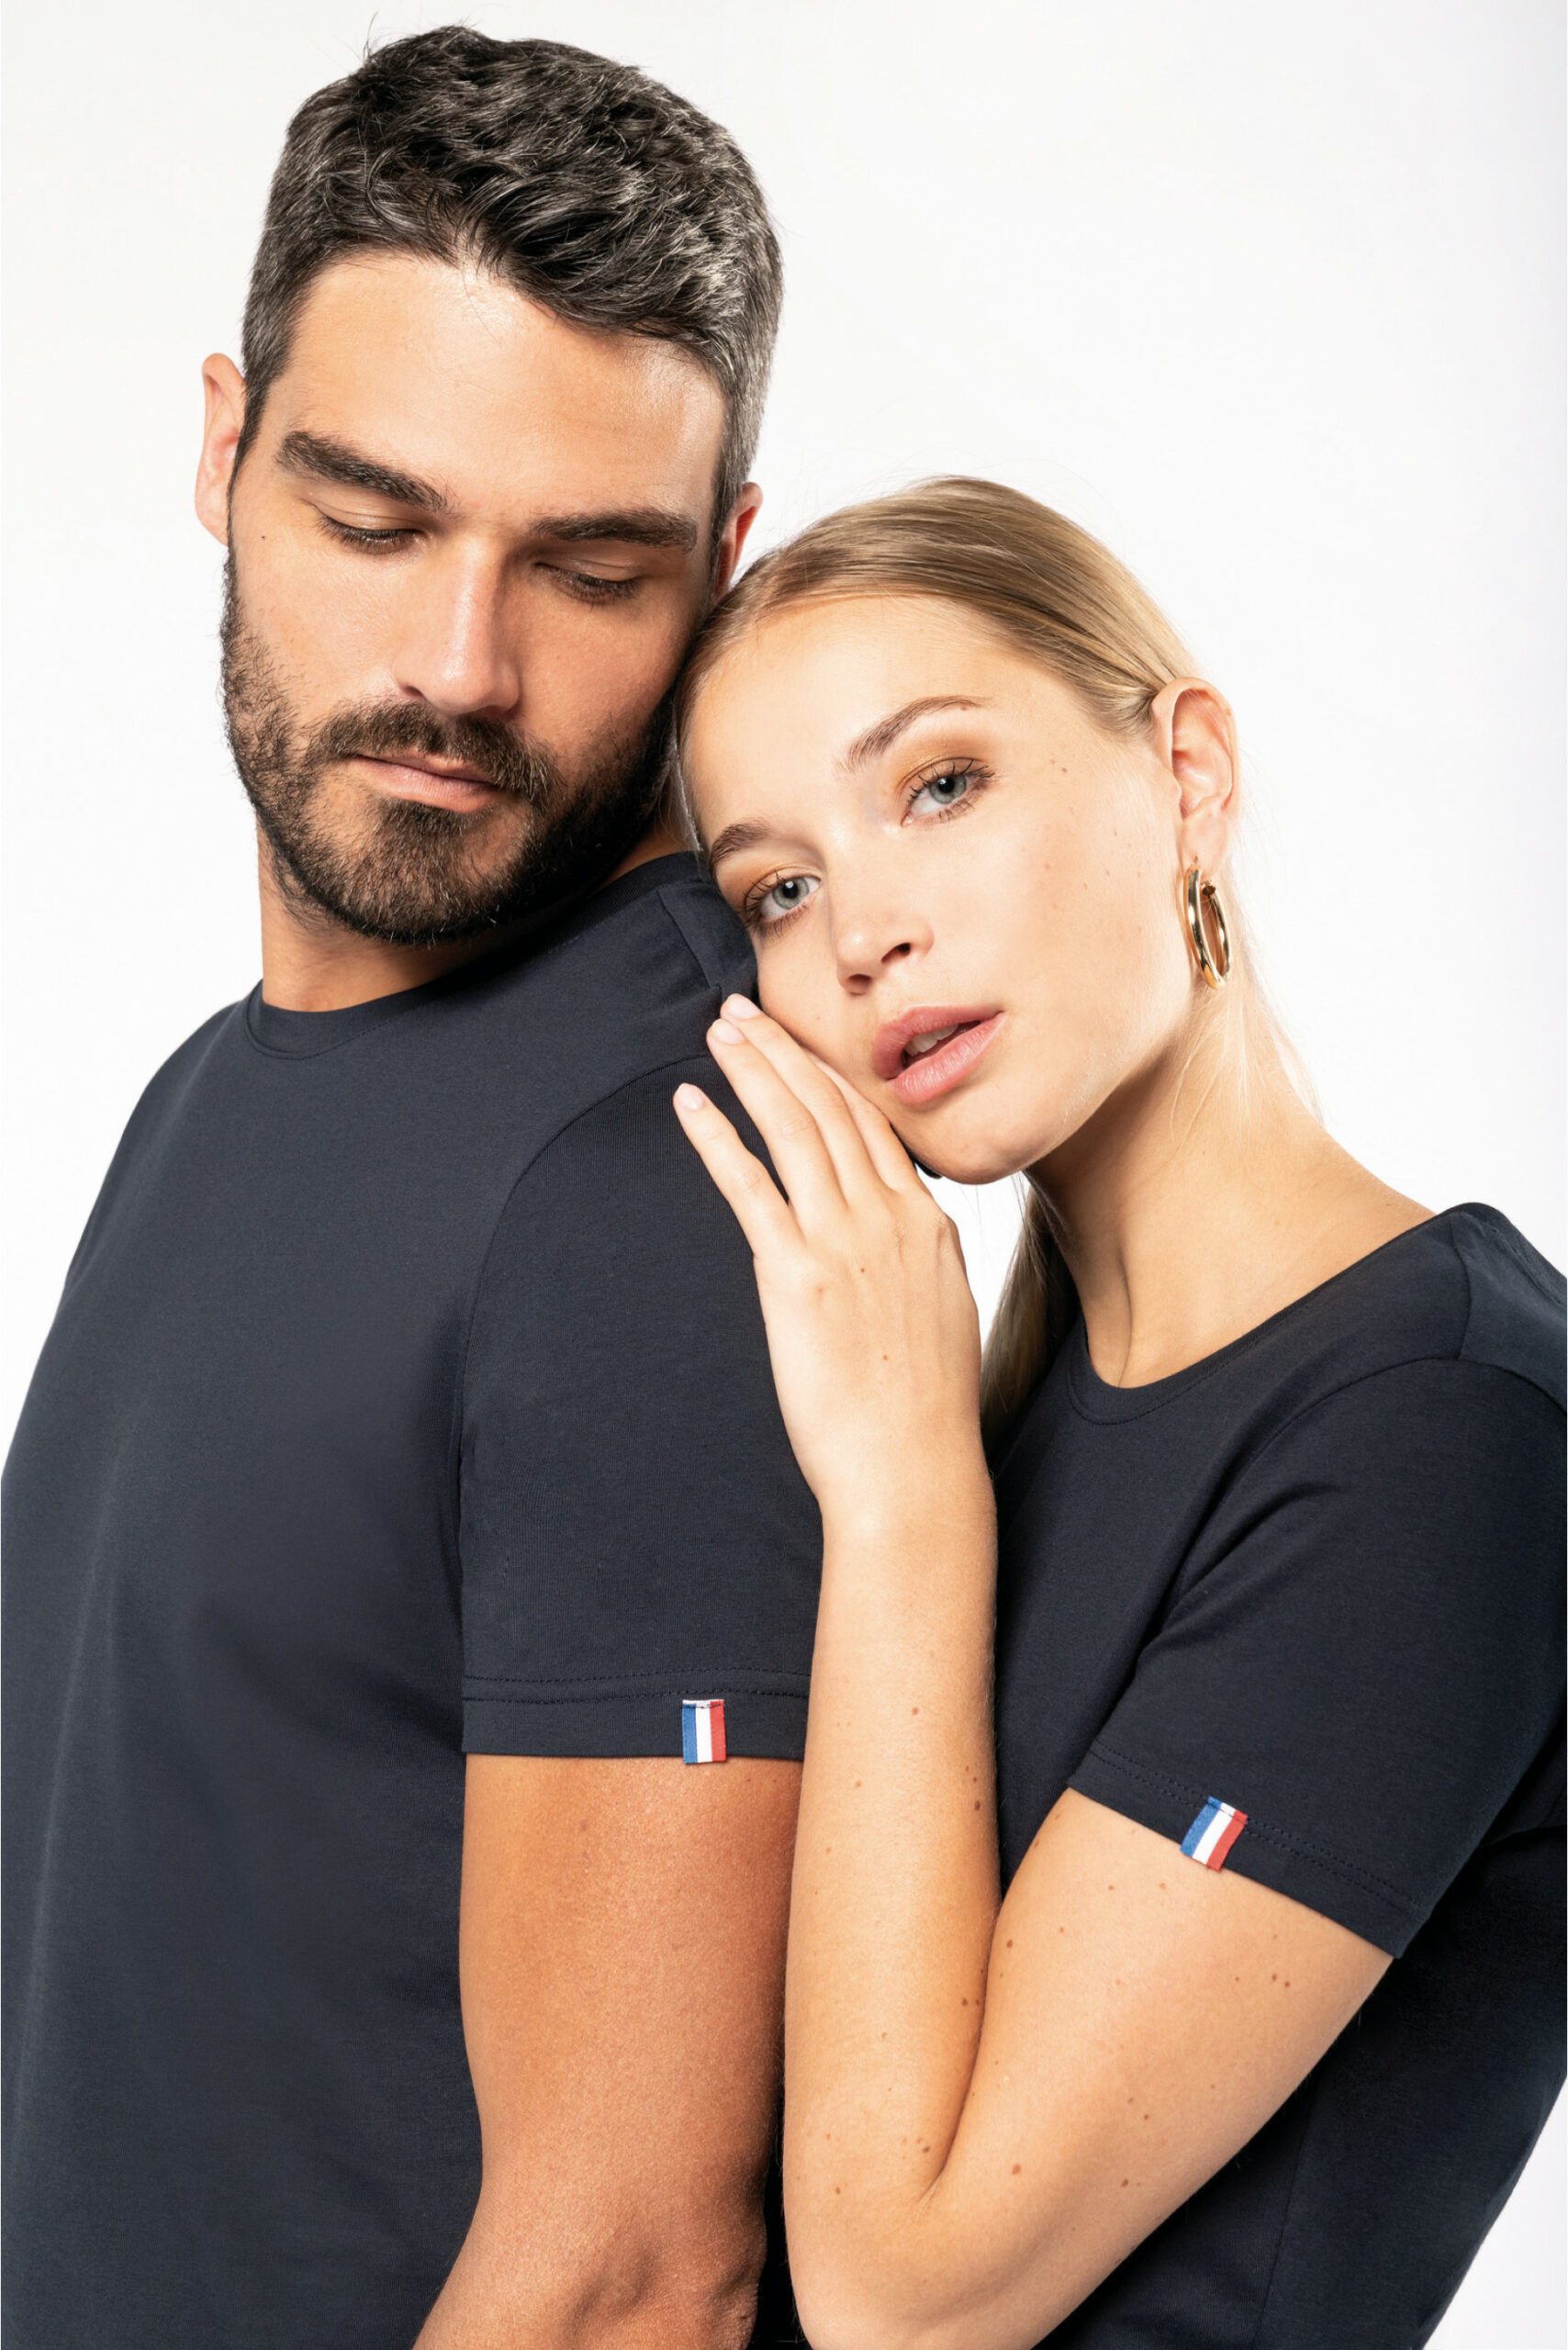 T-shirts marines Made in France homme et femme